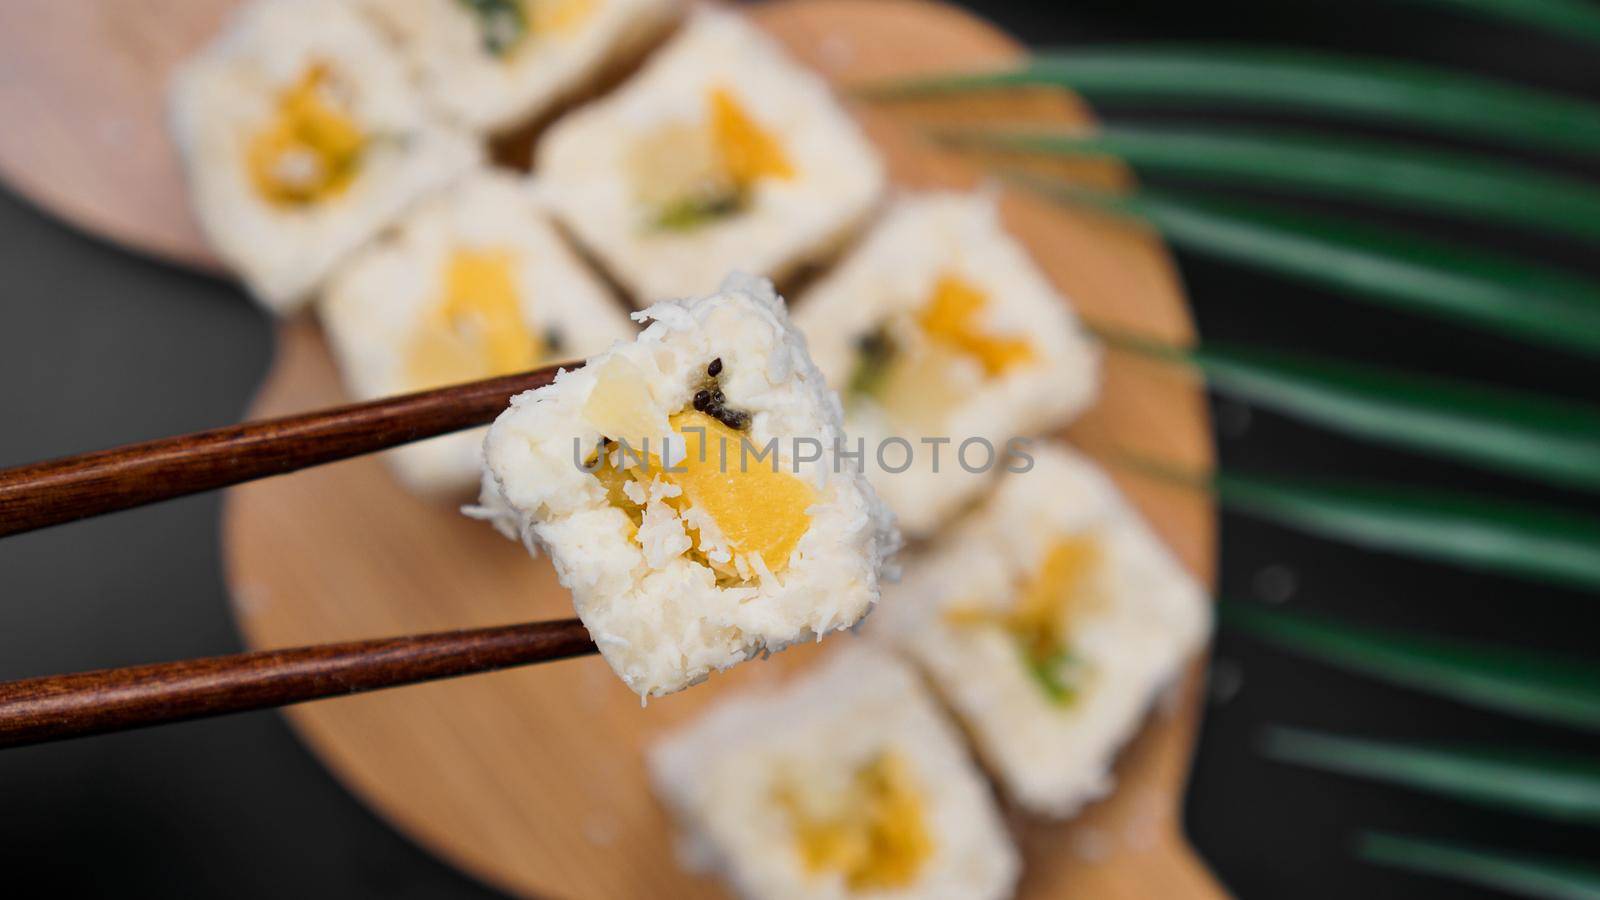 Dessert sushi. Sweet kiwi, pineapple sushi rolls. Sushi on a wooden tray on a black background. Holding a sweet roll with wooden sticks.